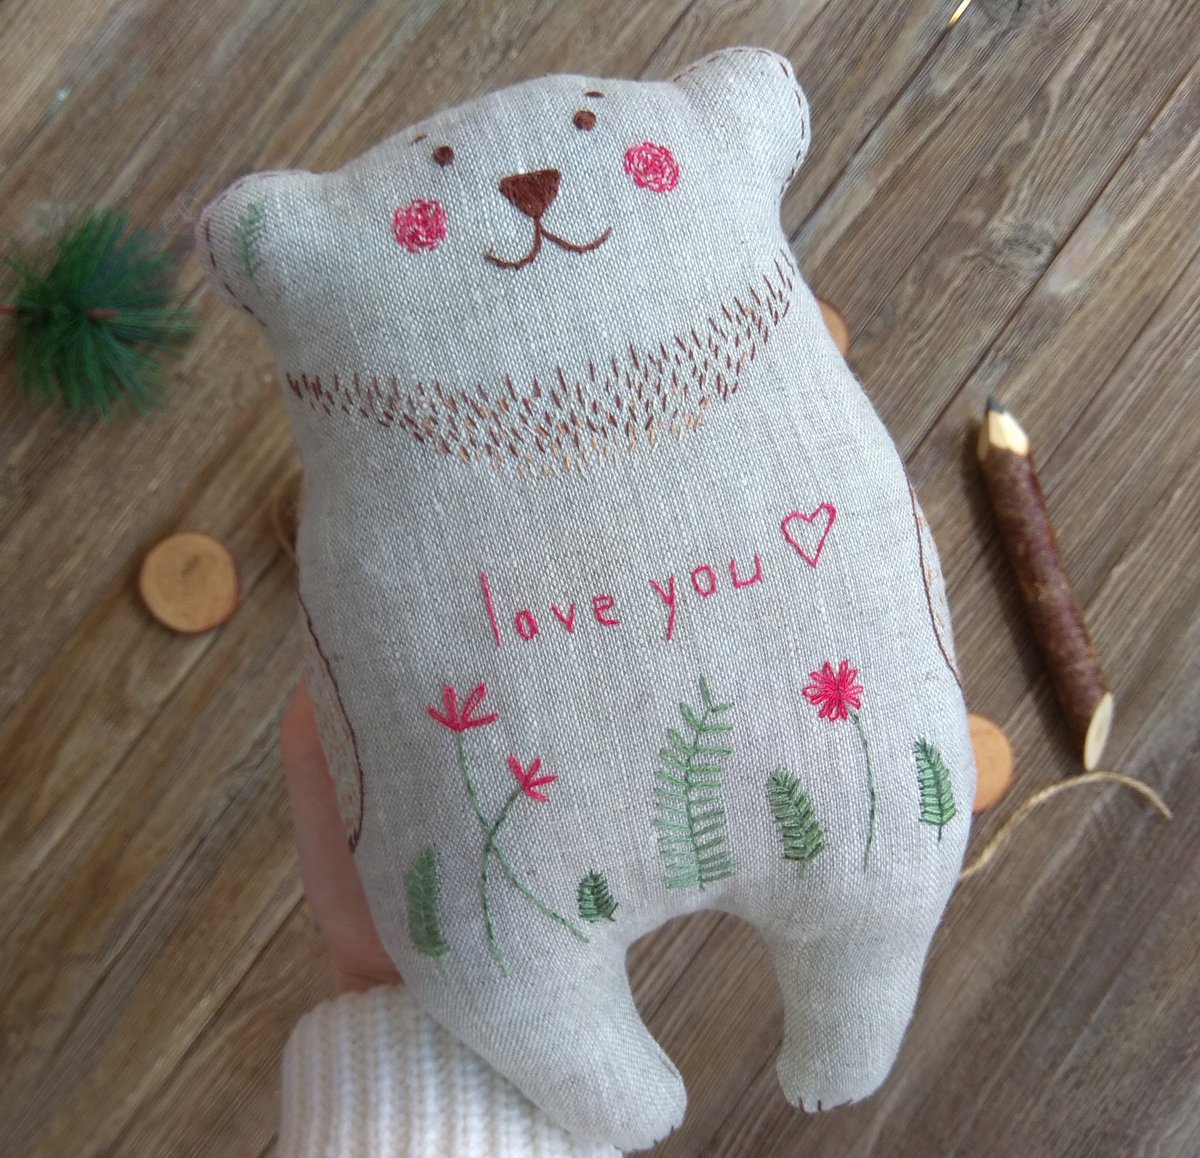 Bear toy love you Embroidered. 😍🧸😍Teddy bear
Gift to your favorite child 🐻

#embroideredtoy #forestfriends #ecotoy
#organictoy #Teddybear #Handmadesofttoy
#Beartoy #linenteddybear  #Bears
#bearlove #Linentoy #handmade
#Beartoyloveyou #toyloveyou #toylove